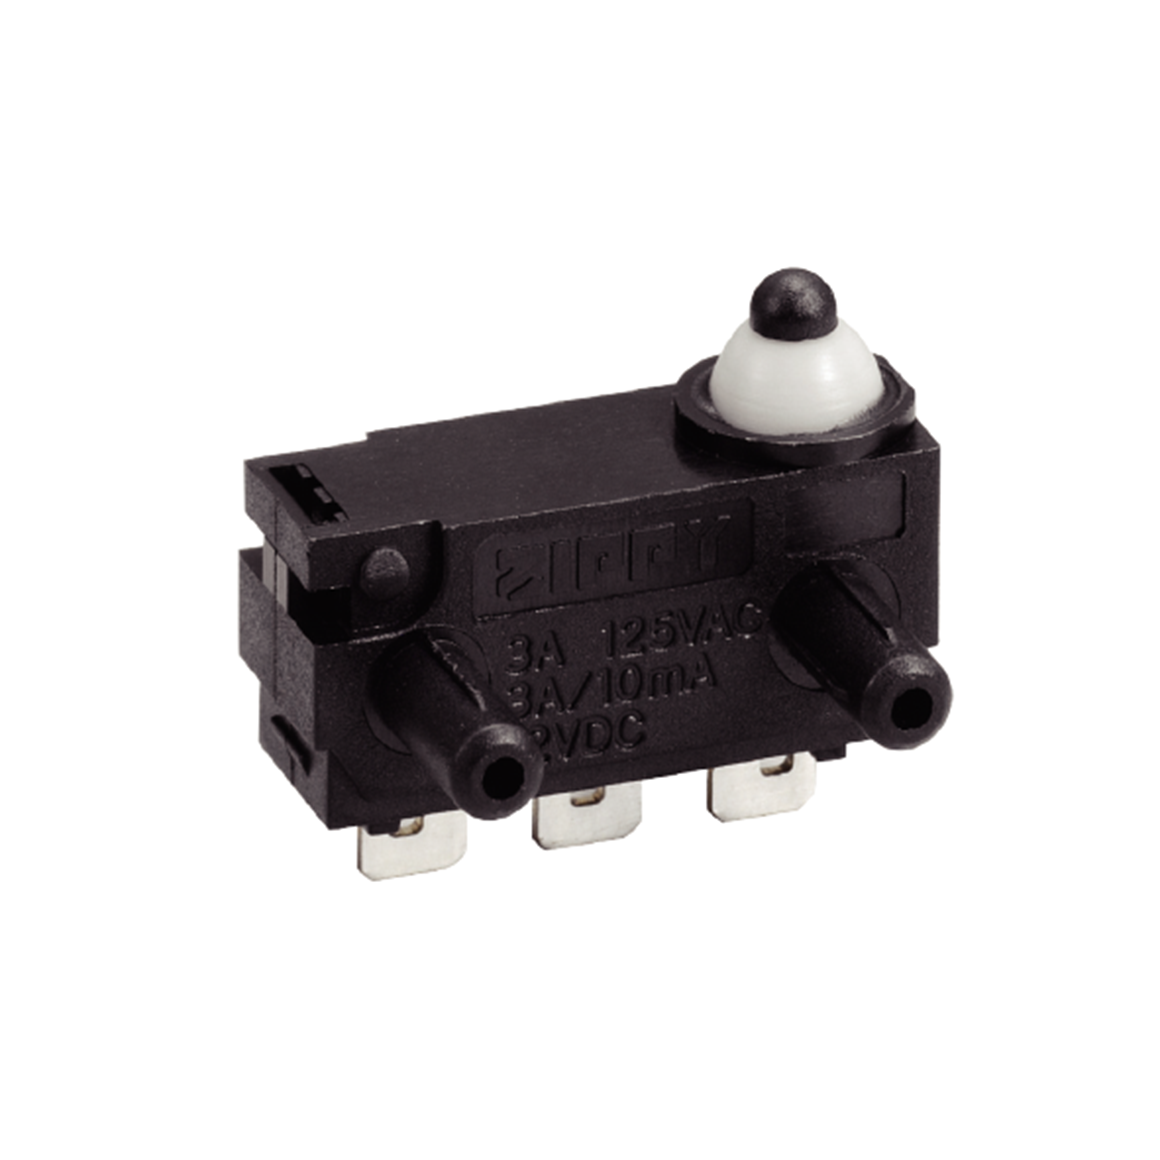 sealed-water-proof-switches-dw-series-1